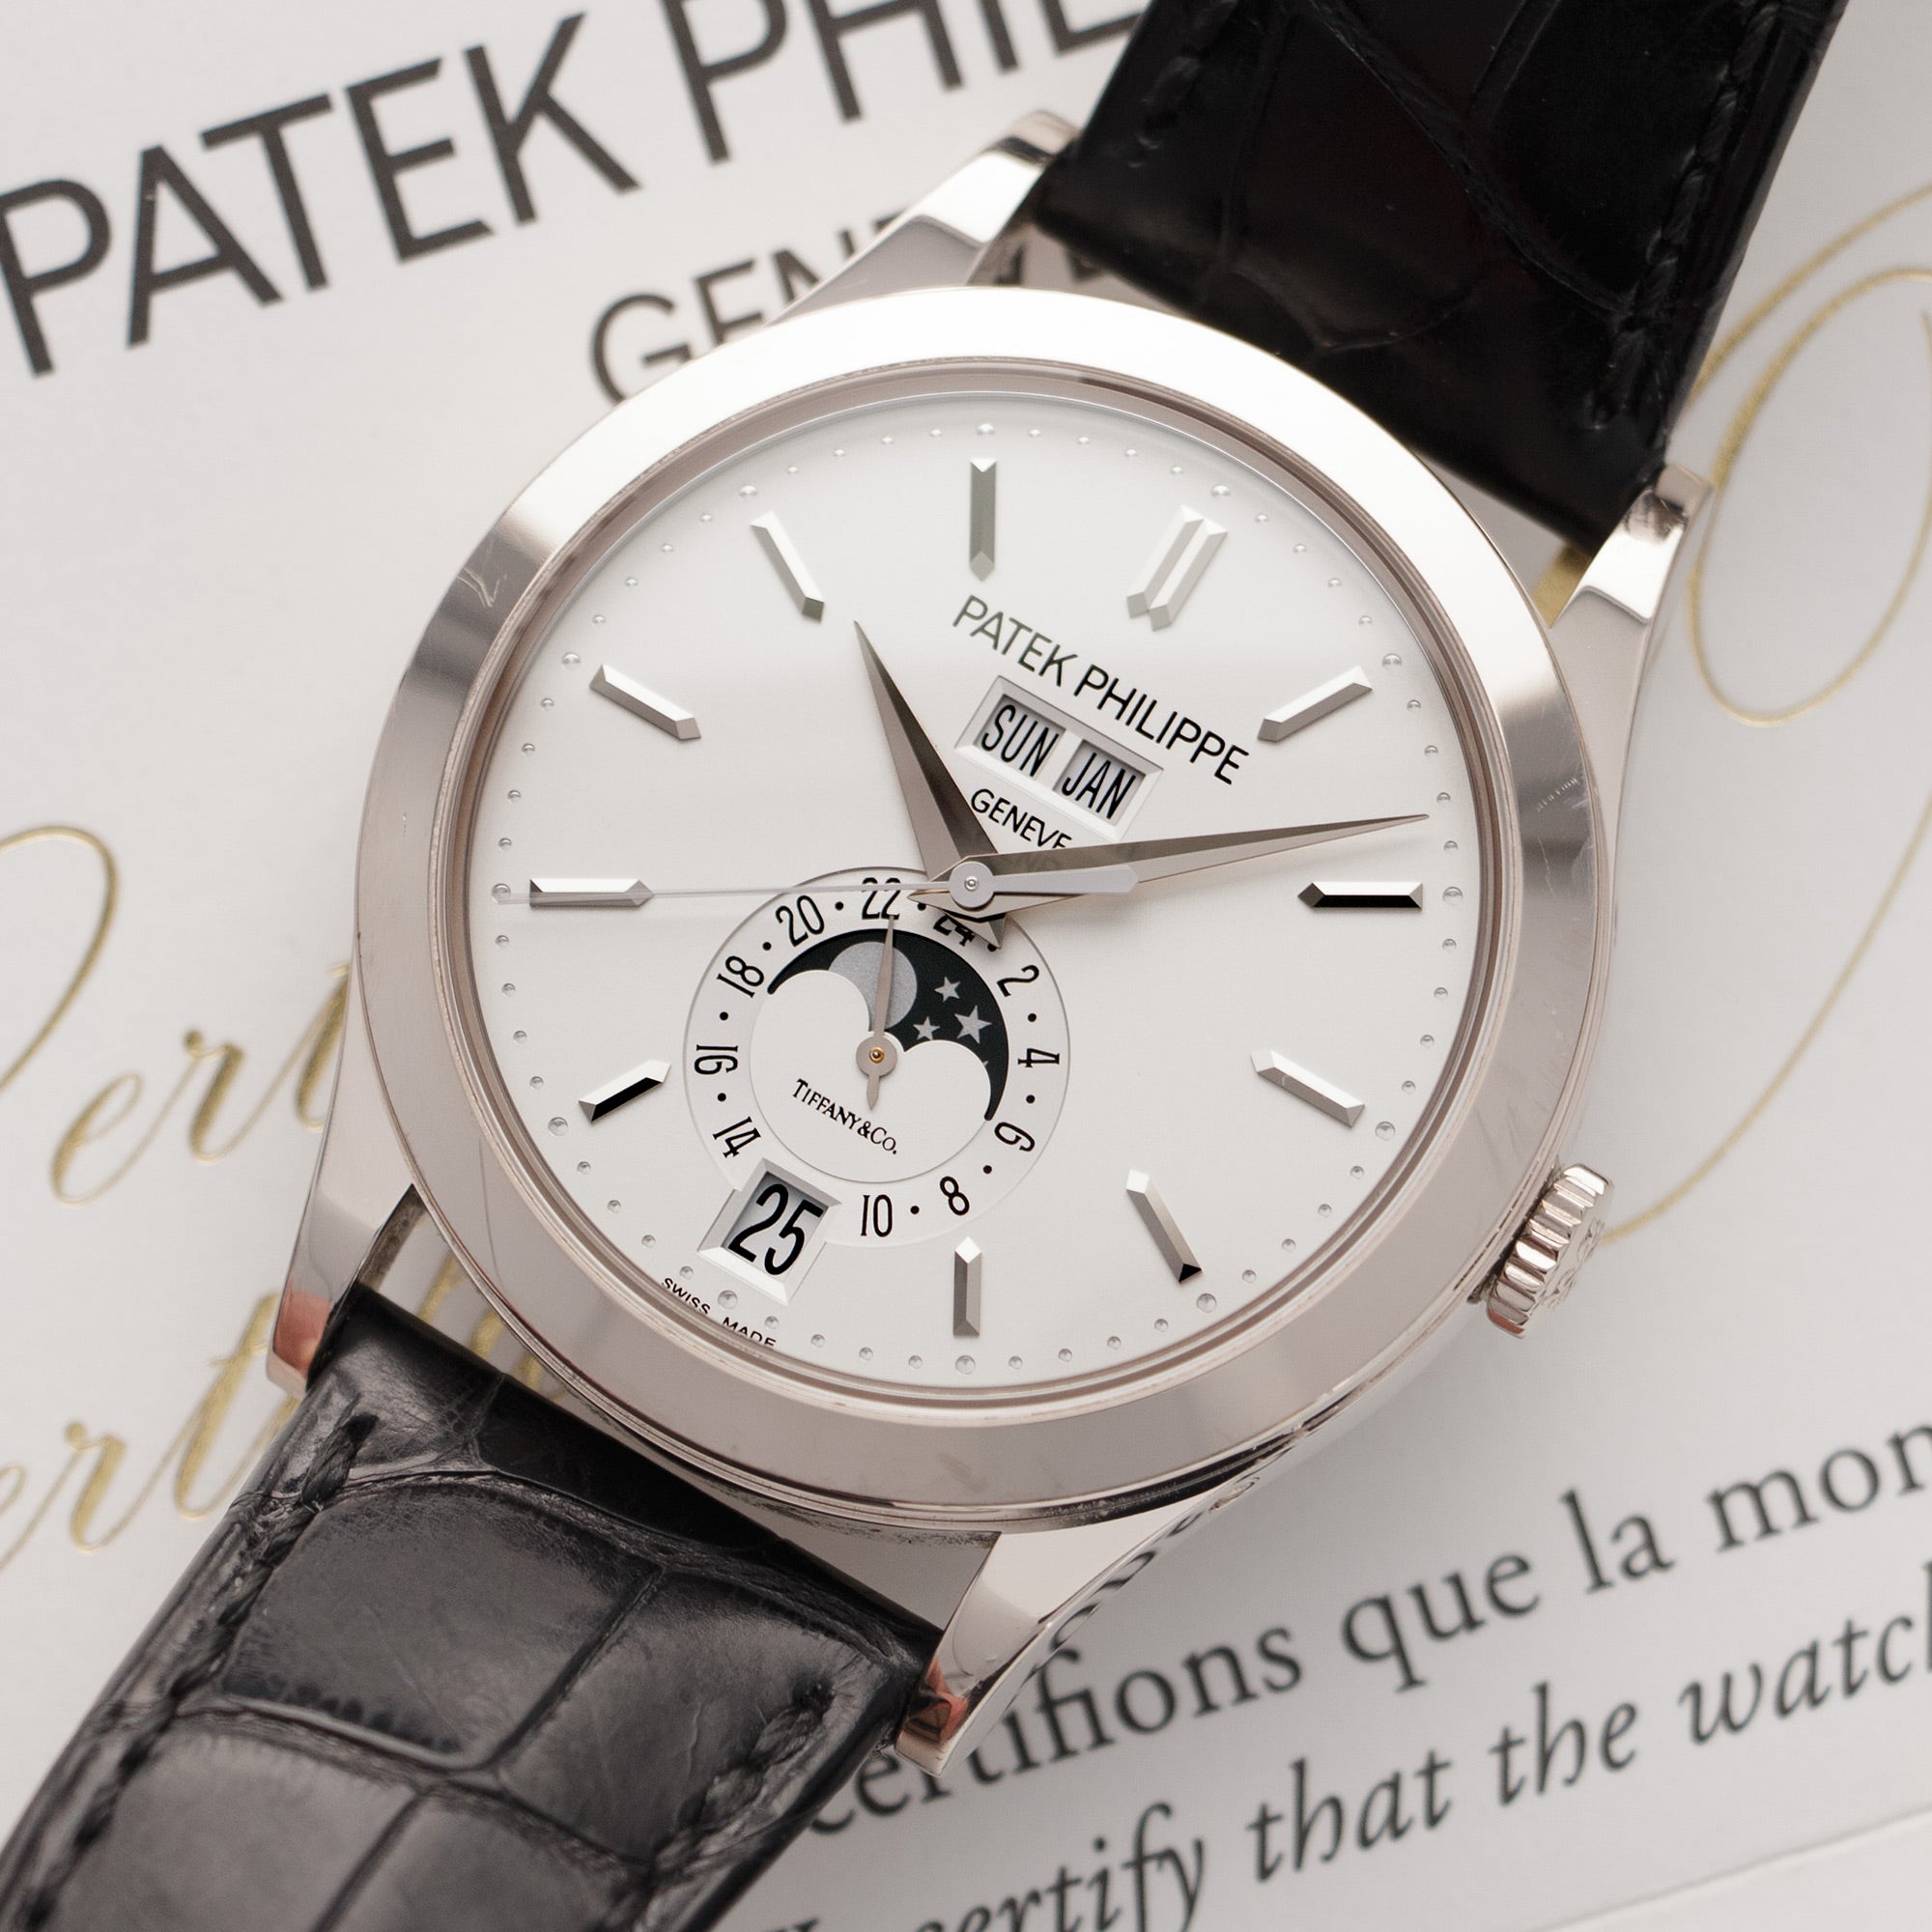 Patek Philippe White Gold Annual Calendar Watch, Ref. 5396. Retailed by Tiffany &amp; Co.